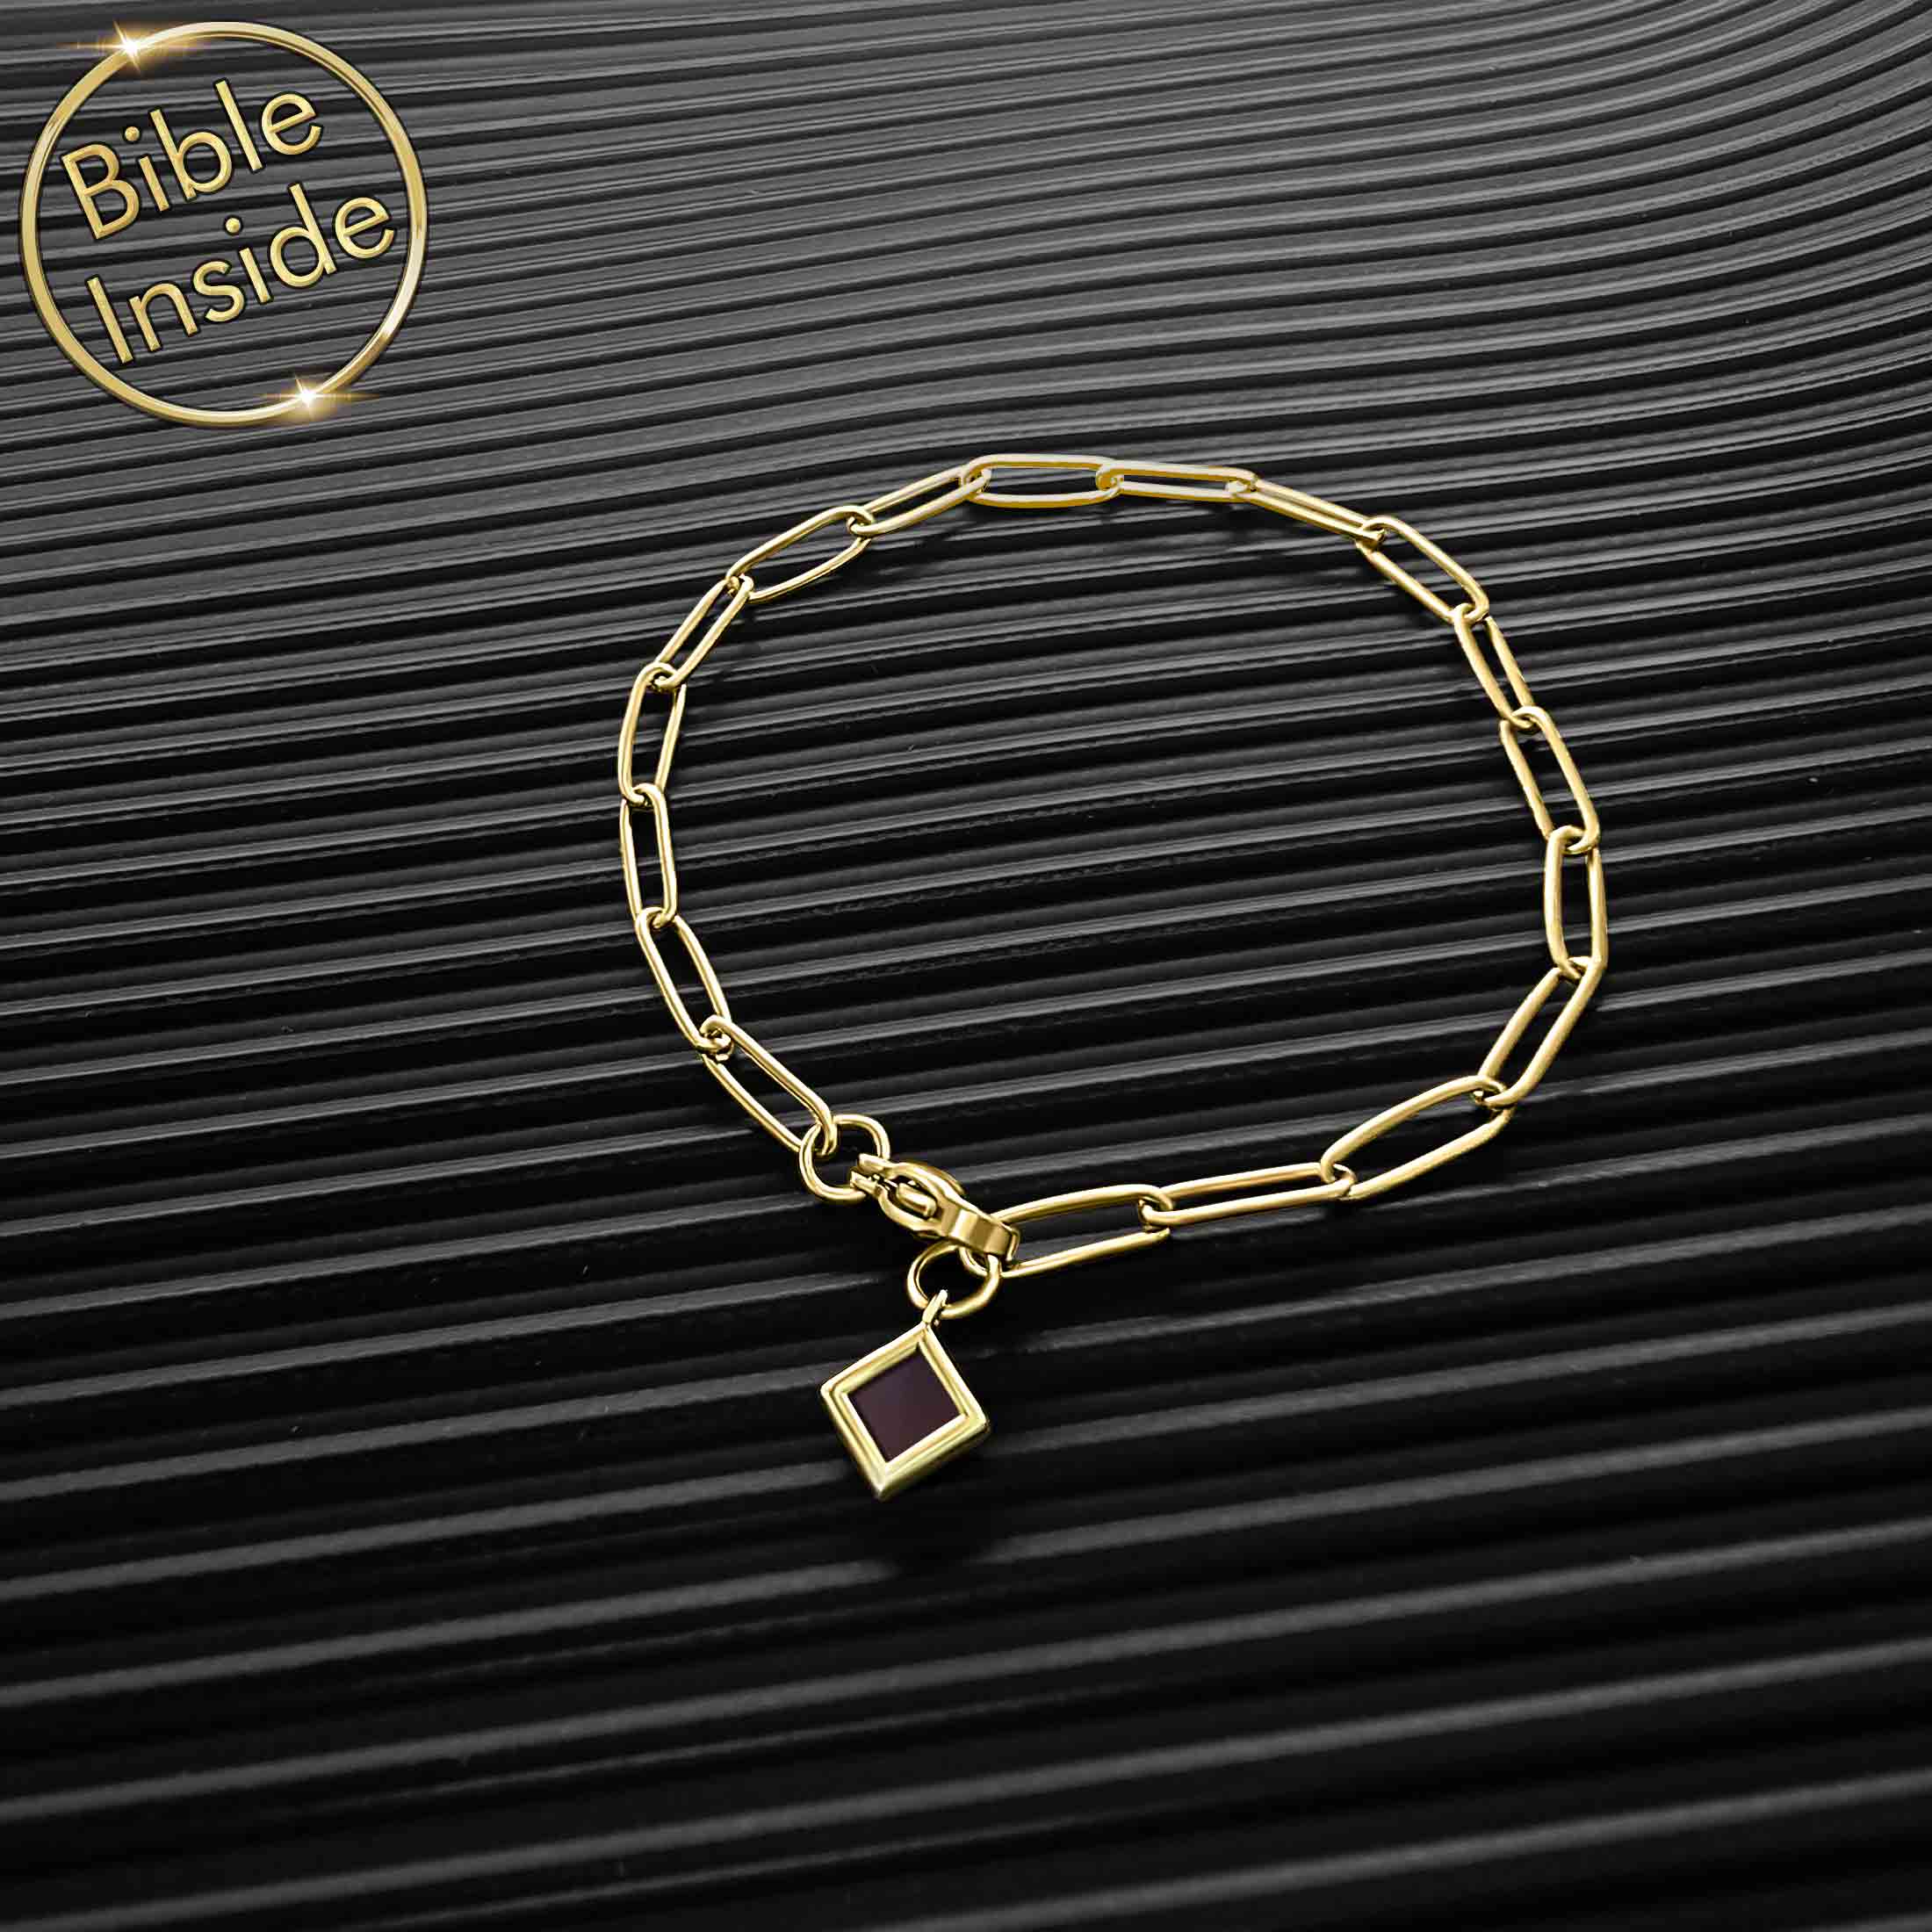 Christian Bracelets With Scriptures With Nano Bible - Nano Jewelry